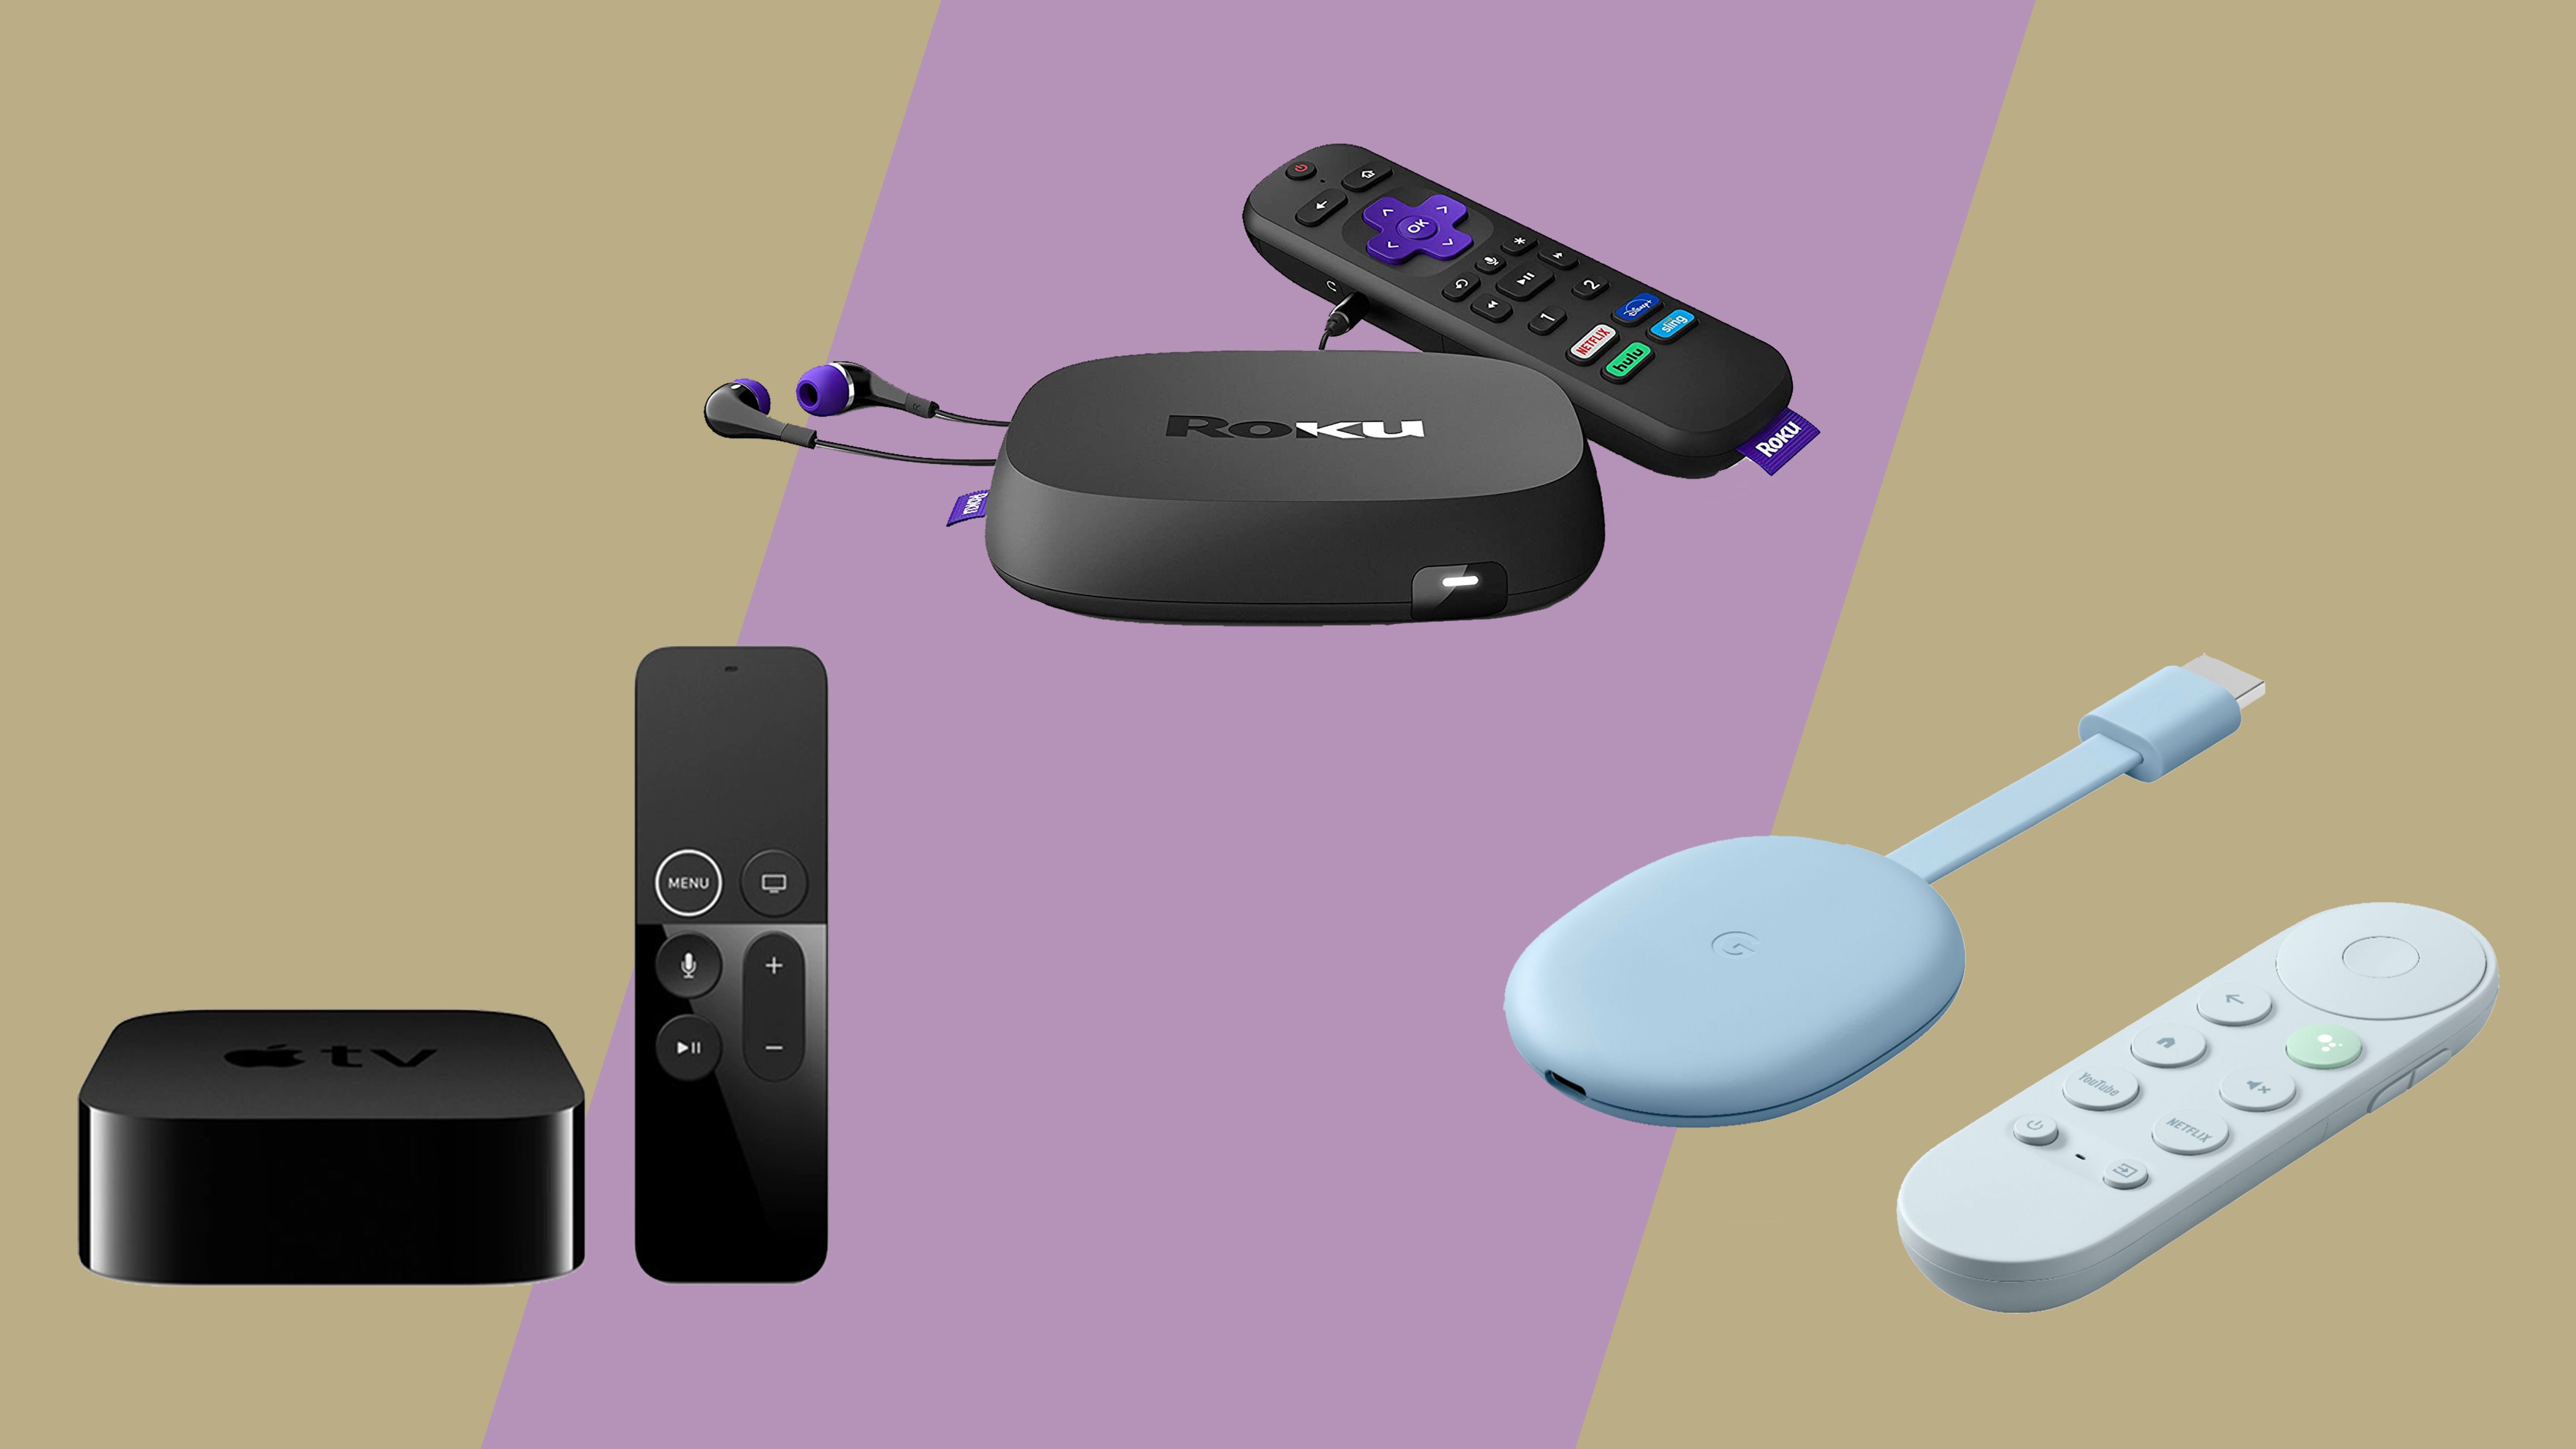 How to watch and stream CHANNEL ZeRO - 2020 on Roku